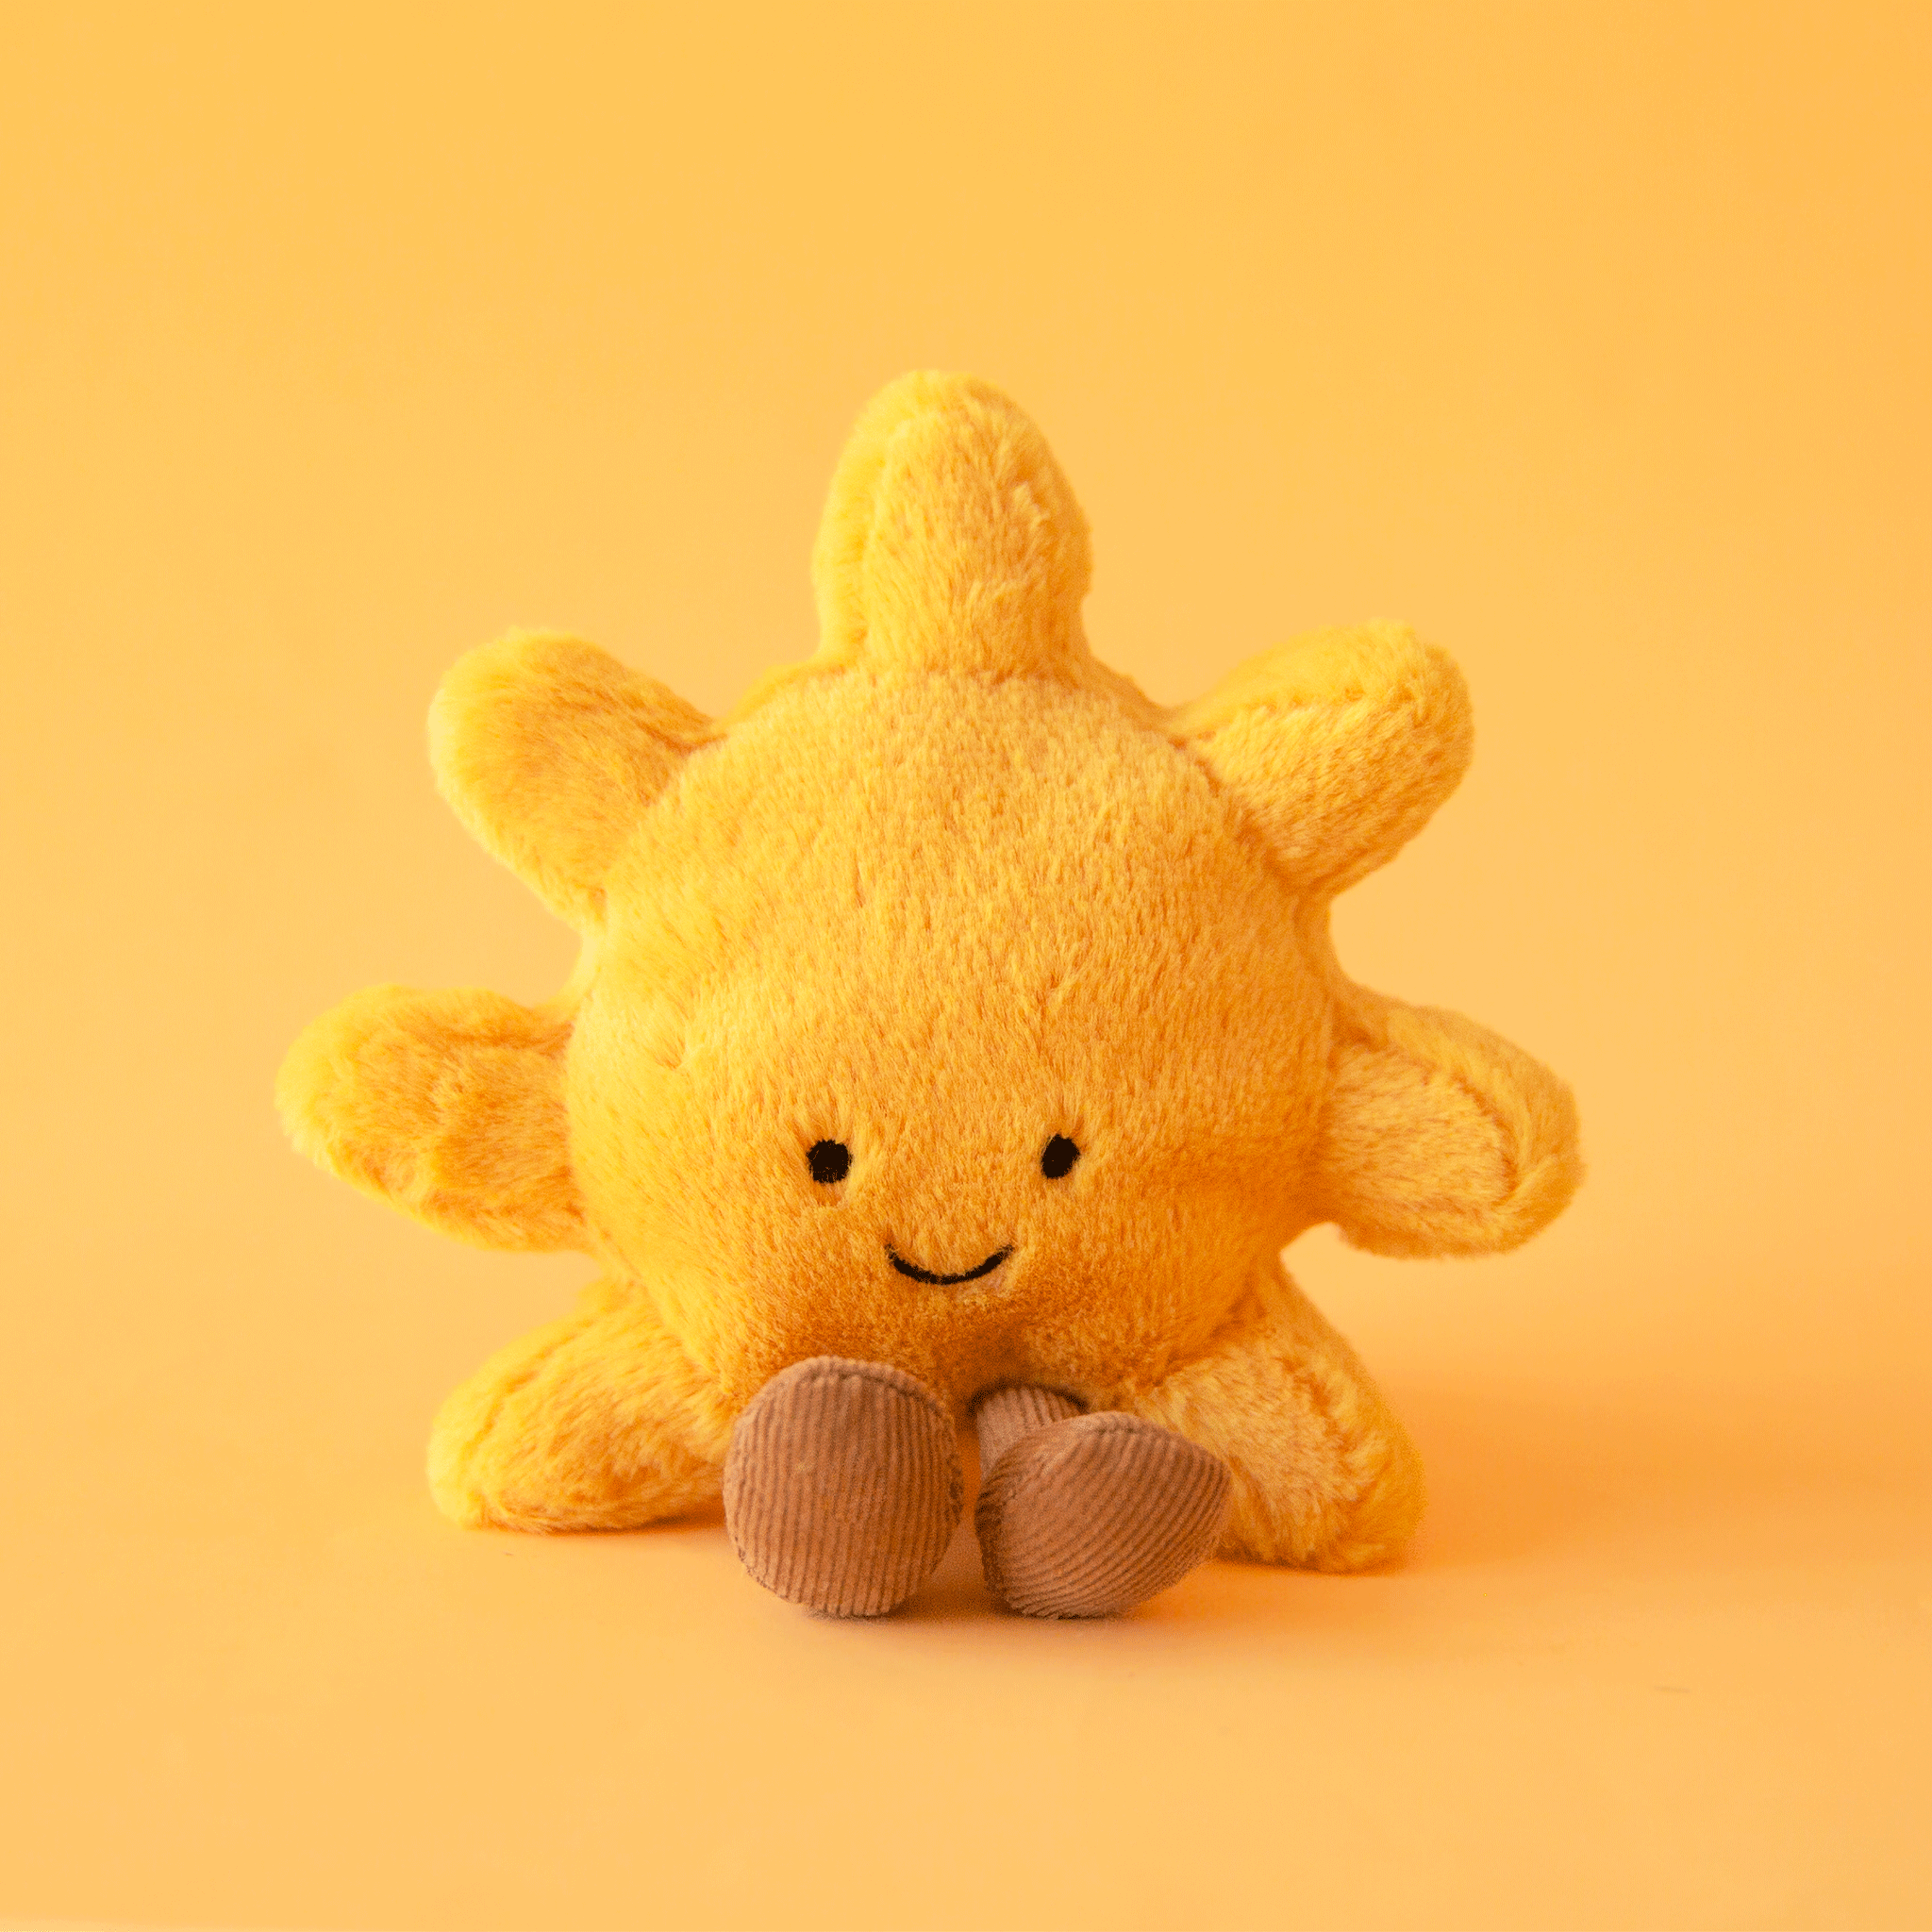 On a yellow background is a yellow sun shaped stuffed toy keychain / bag charm. 